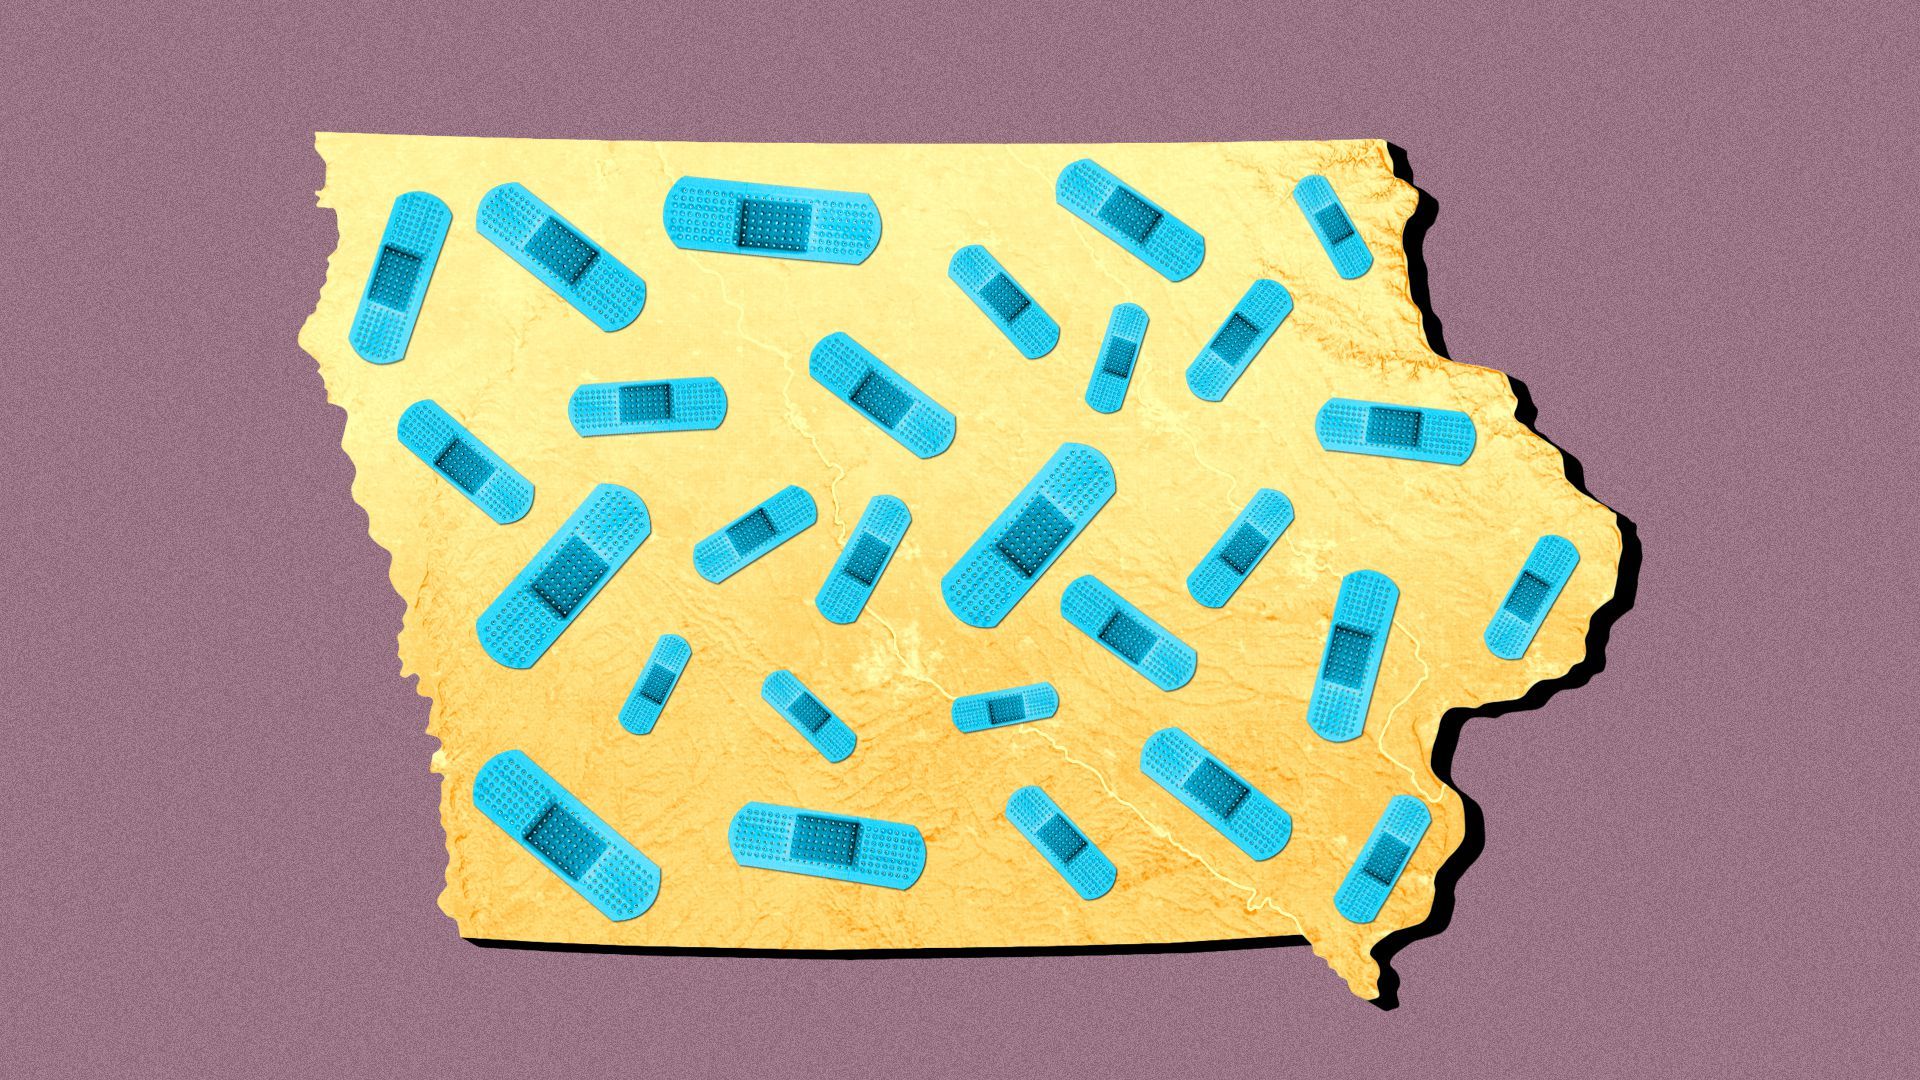 Illustration of the state of Iowa covered in bandages.